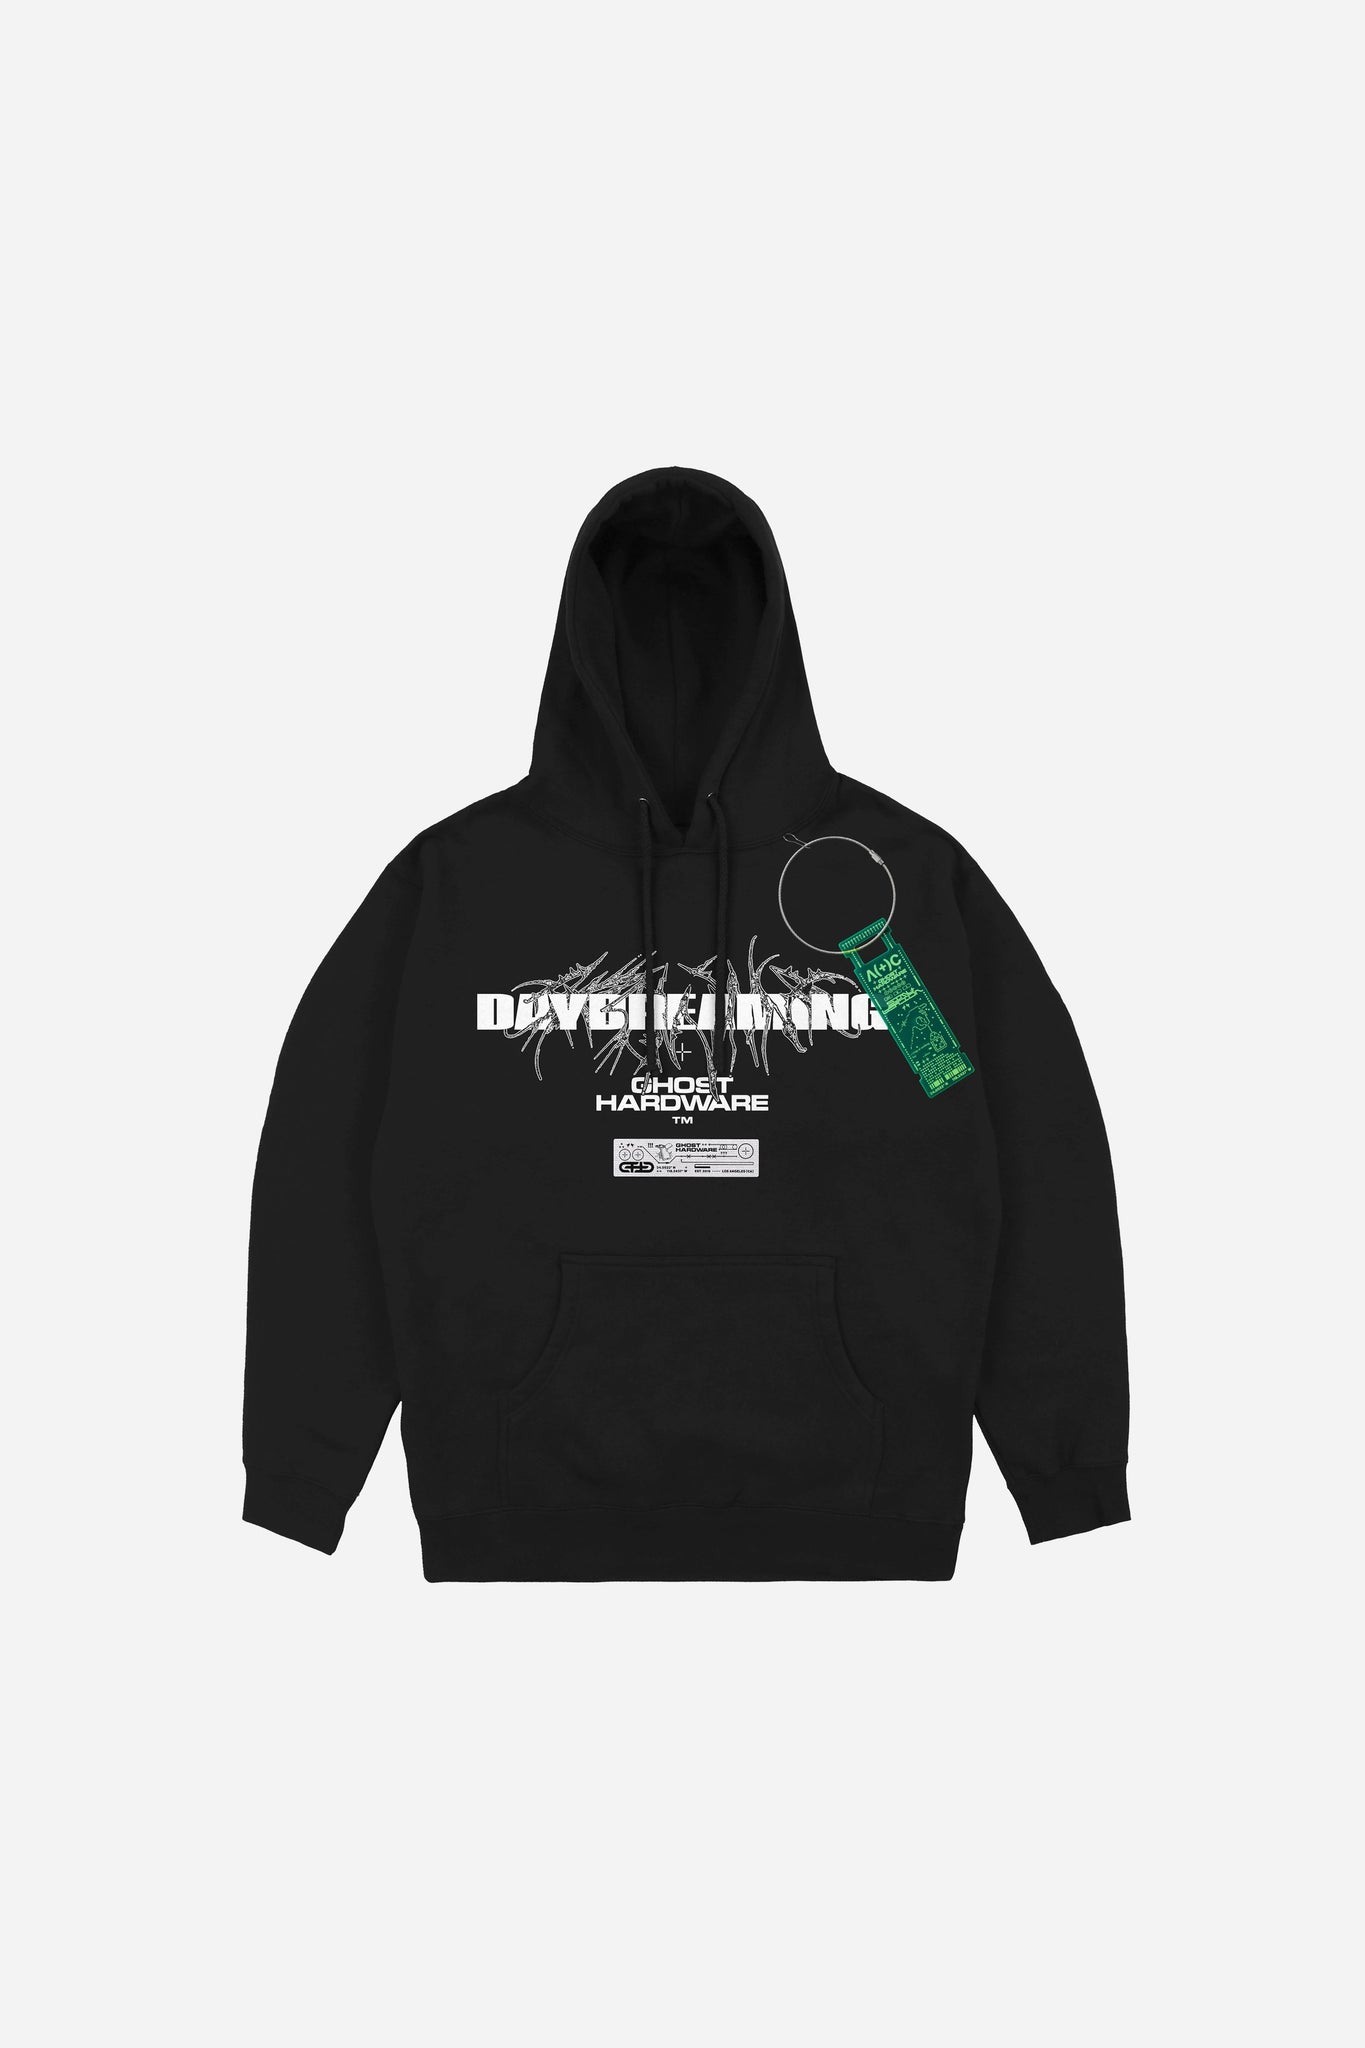 Daydreaming [ patch ] [ S ] Hoodie